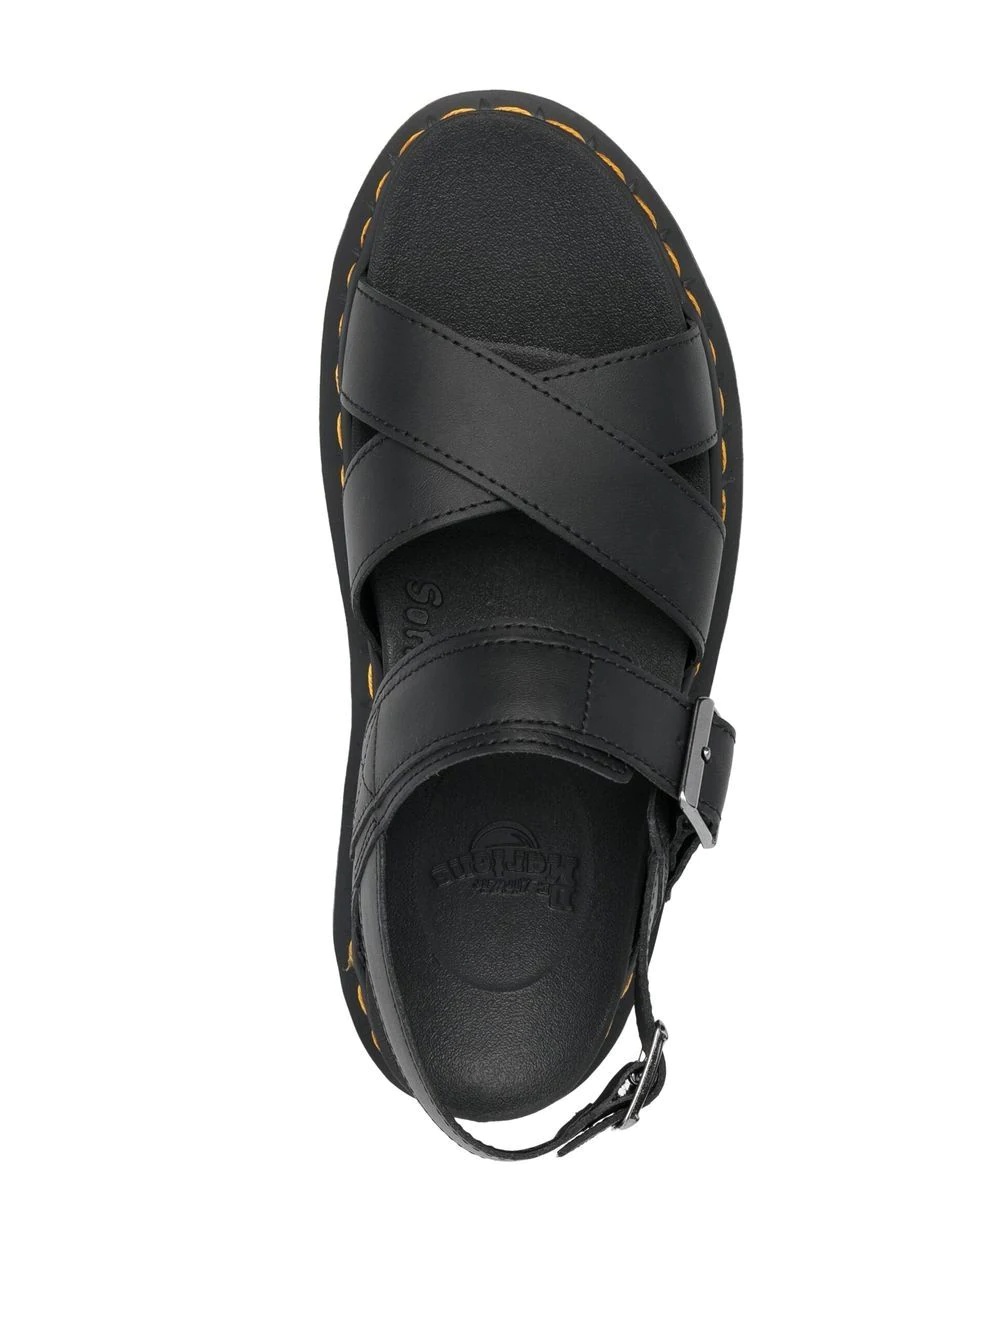 Voss II leather sandals - 4